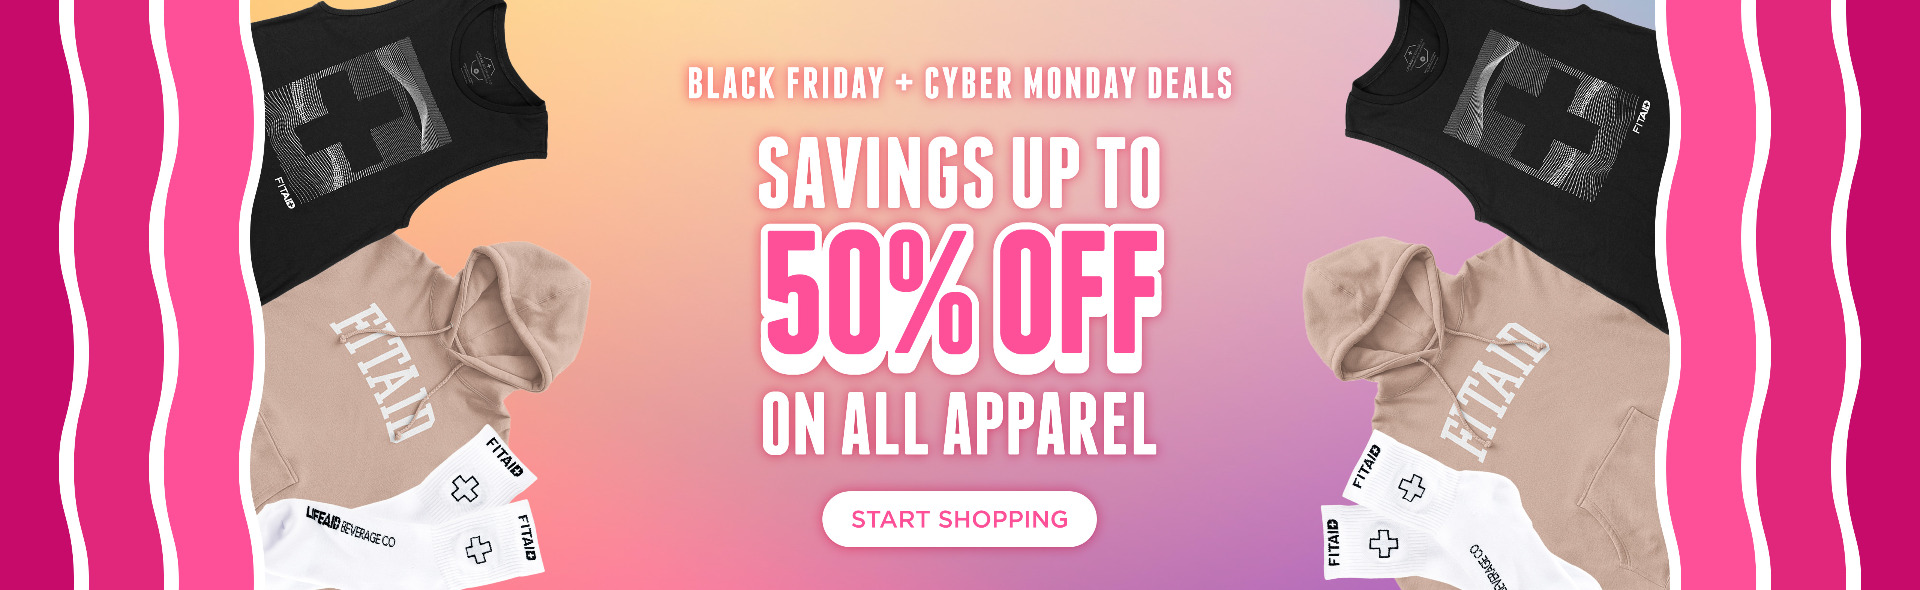 Black Friday + Cyber Monday Deals. Savings up to 50% off on all apparel. Start Shopping.